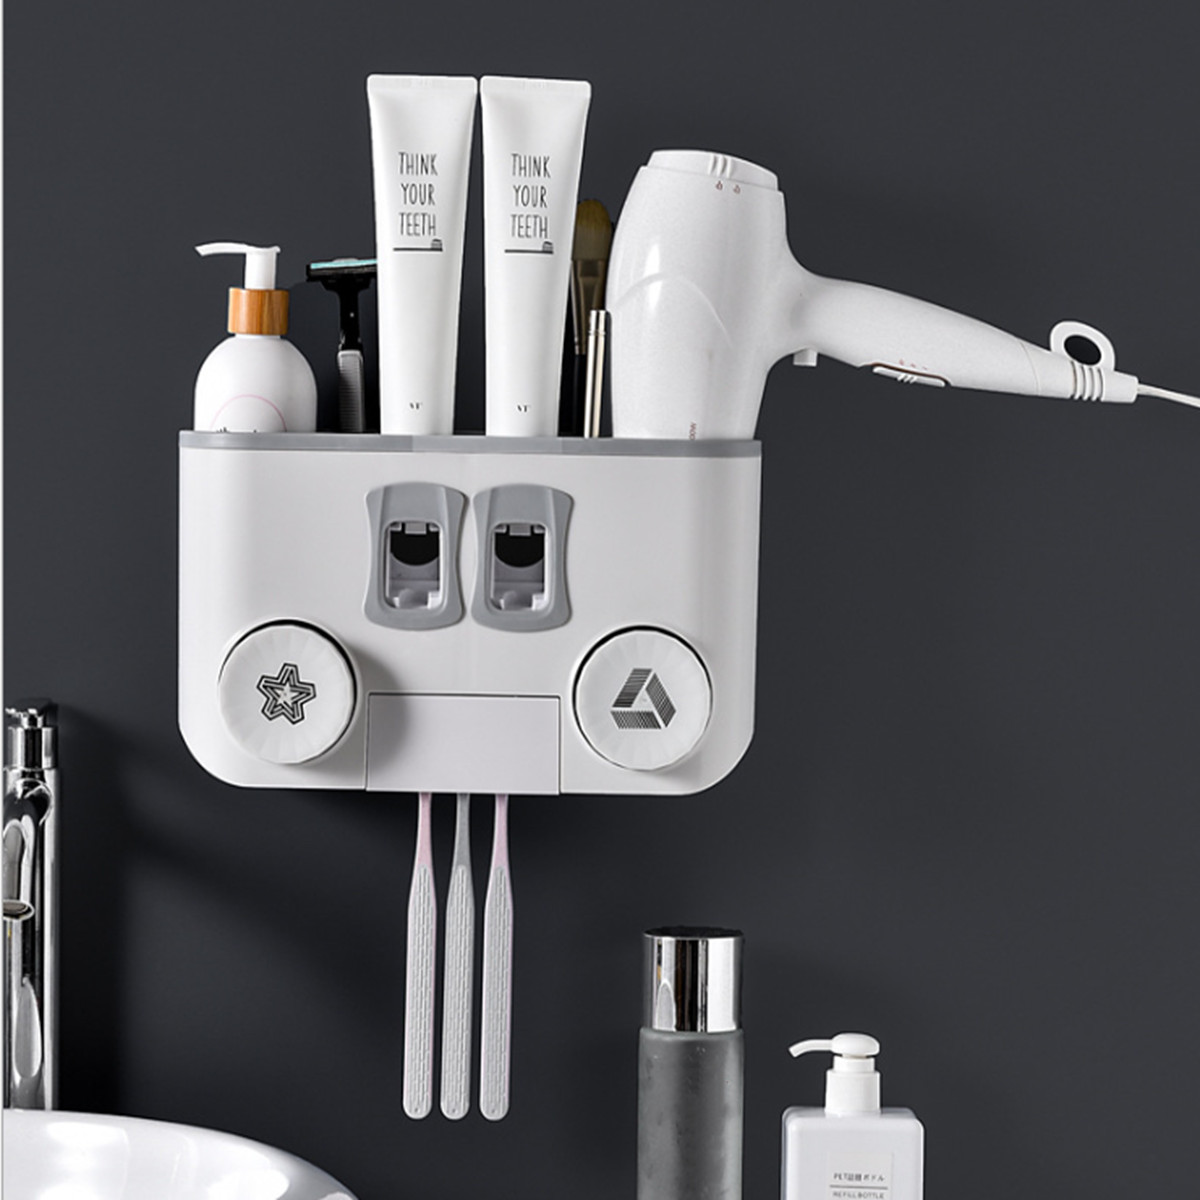 Perforation-free-Wall-mounted-Multifunctional-Plastic-Four-cup-Toothbrush-Holder-Set-1649039-6